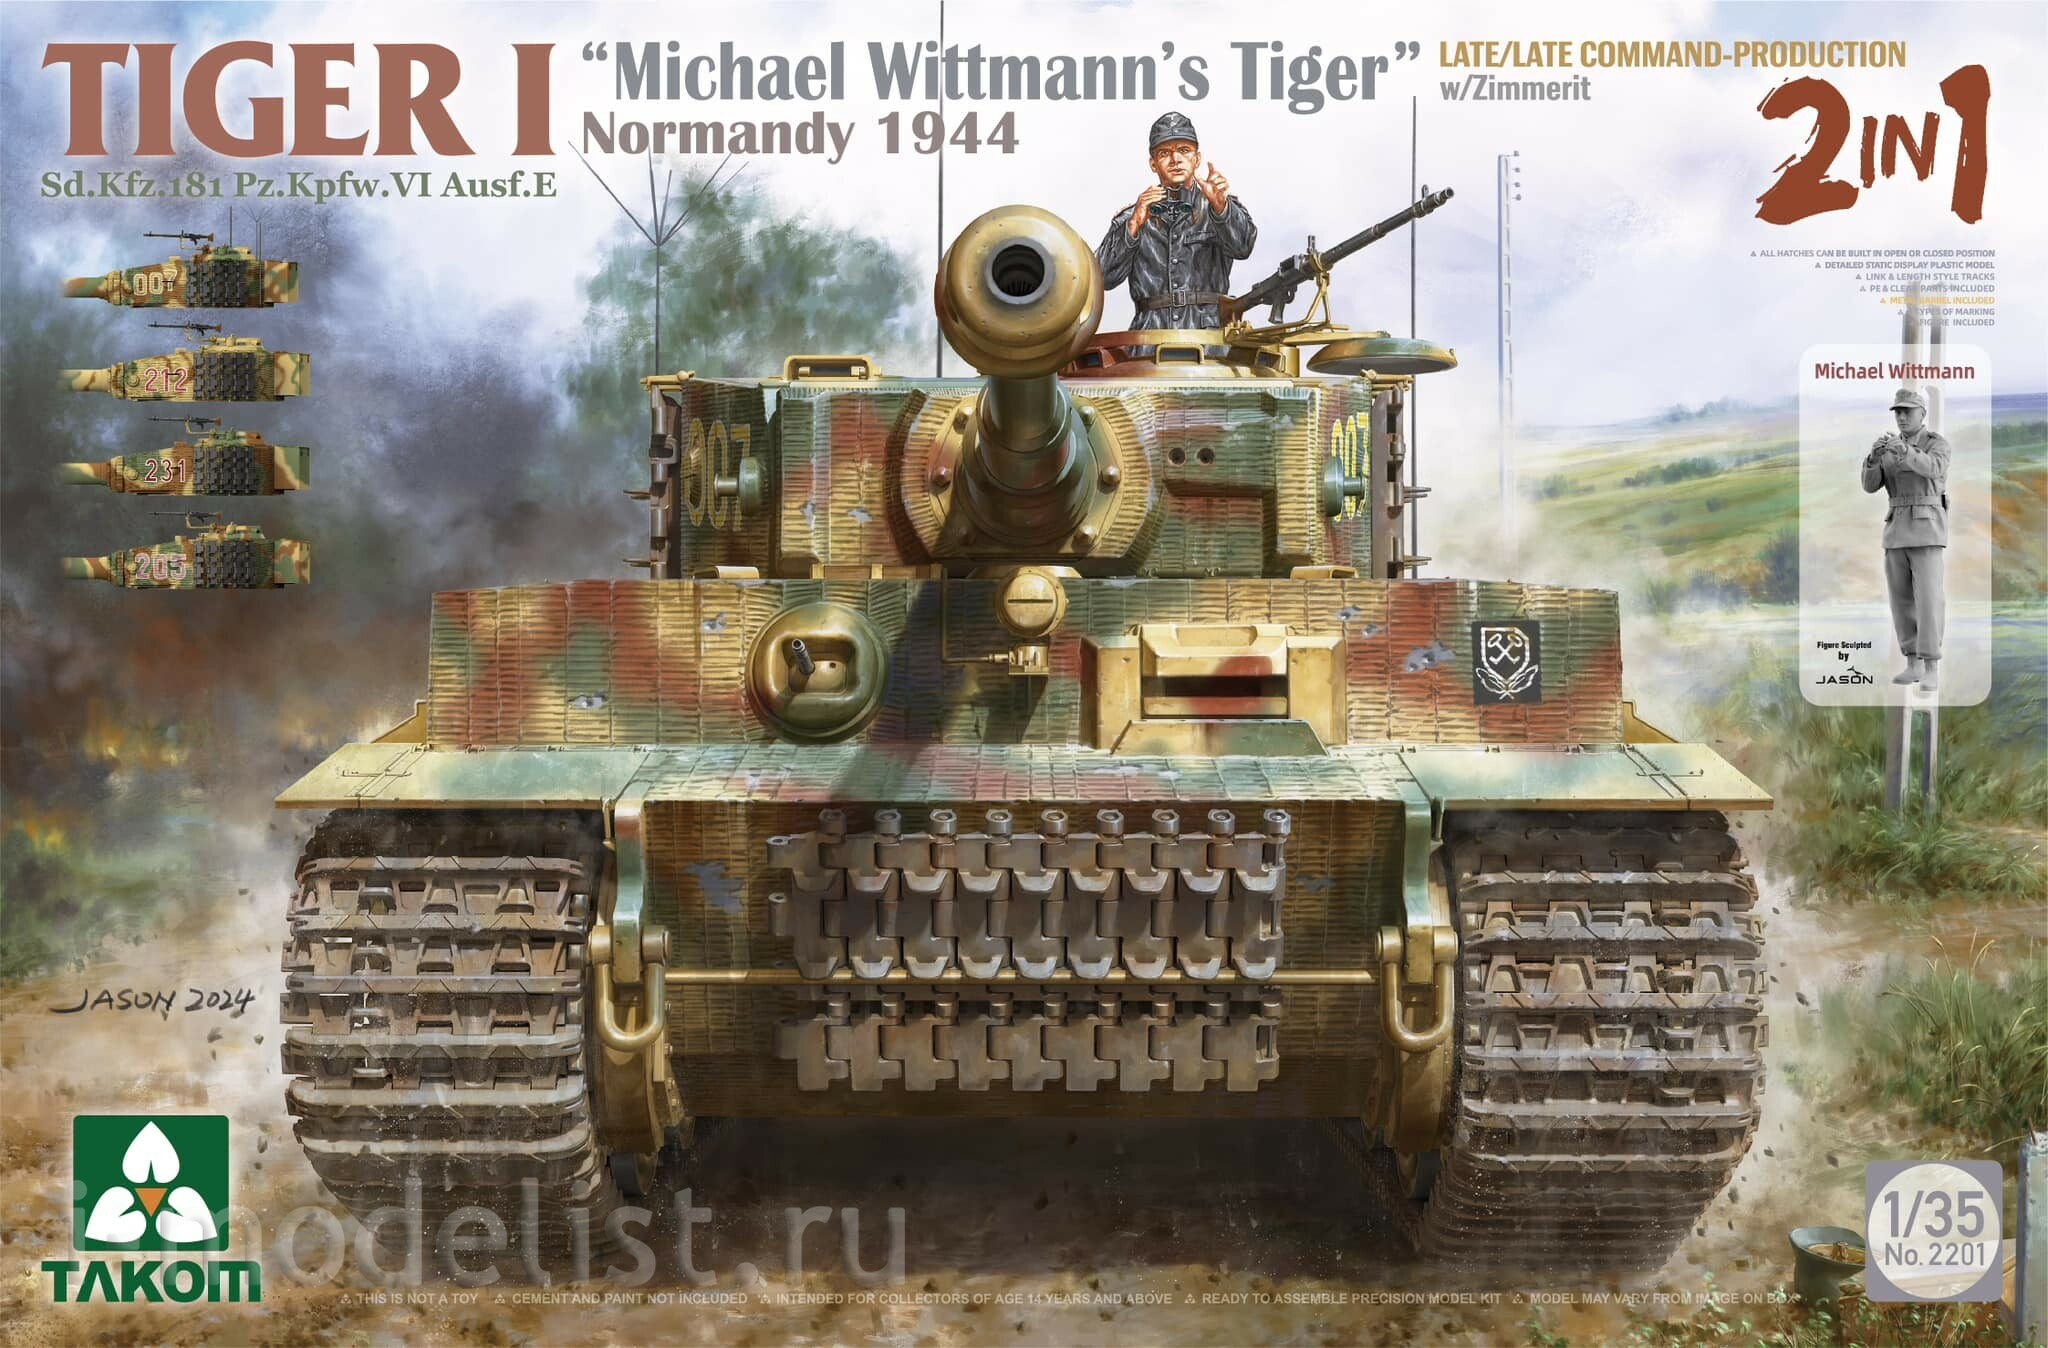 Fotografie 1/35 Tiger I Late Production w/zimmerit Normandy 1944 - Sd.Kfz. 181 Pz.Kpfw. VI Ausf. E "Michael Wittmann's Tiger" (Late/Late Command)